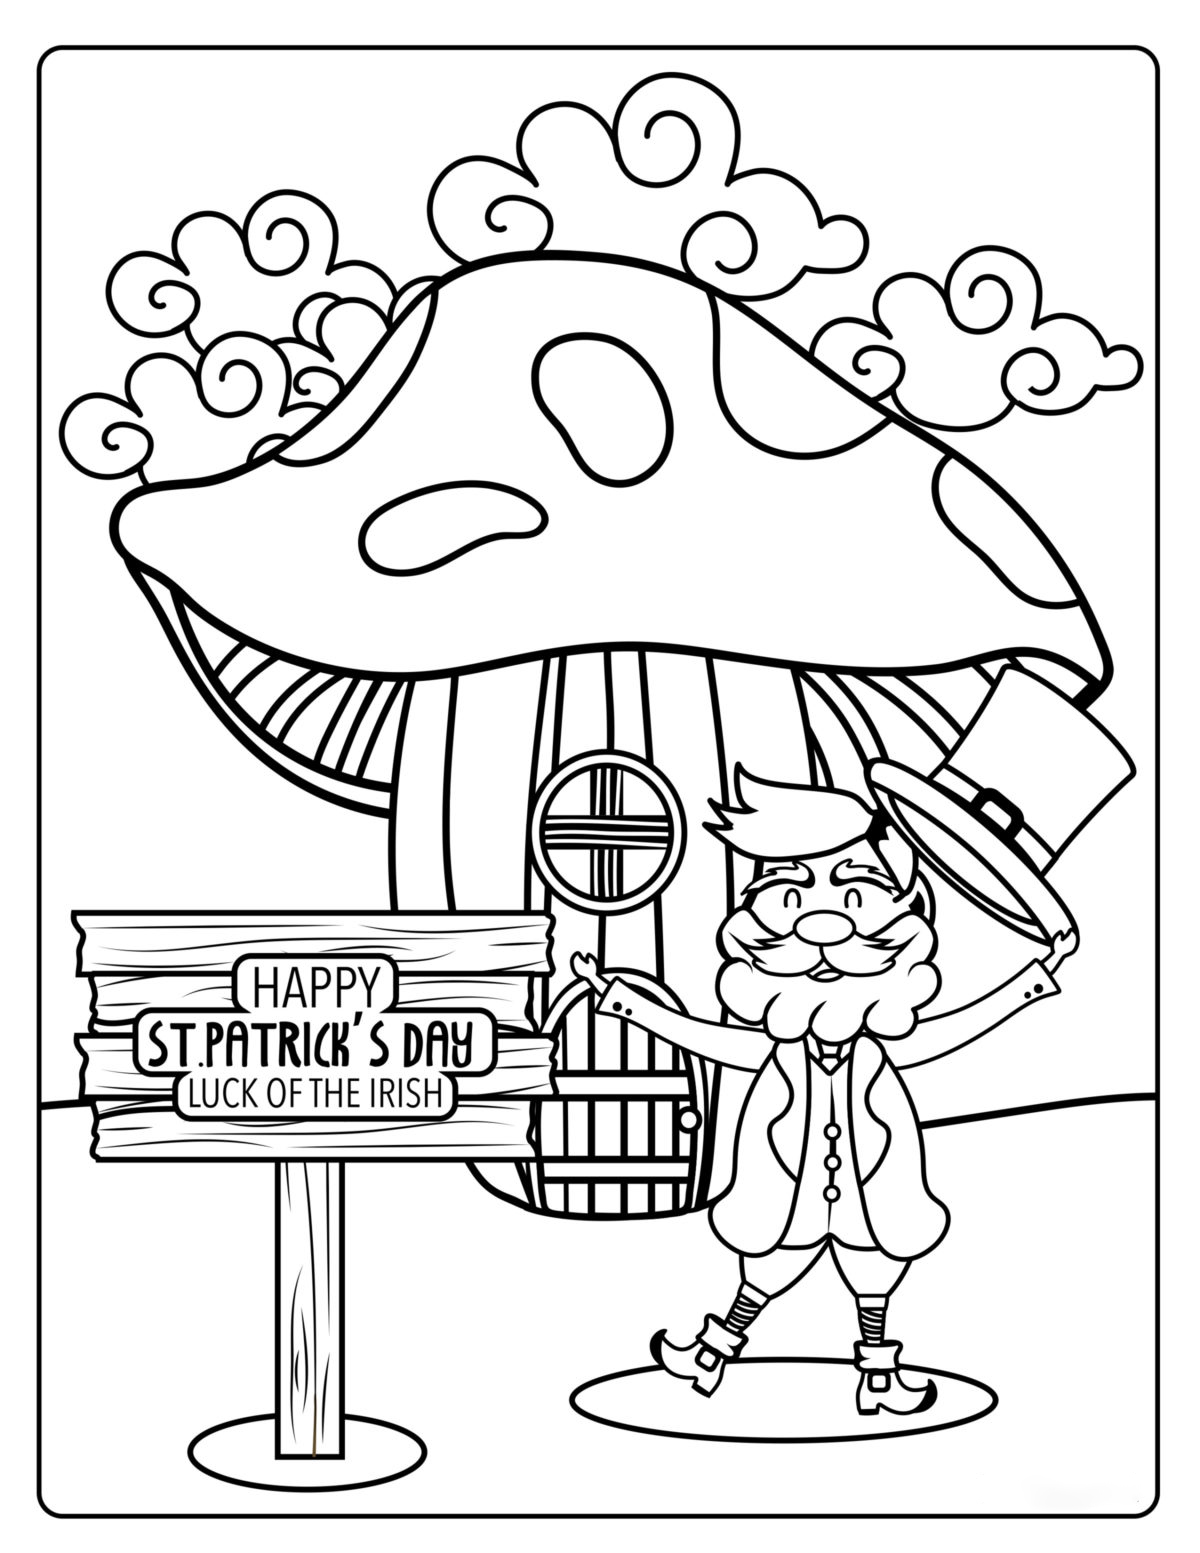 Whimsical St.Patrick day Coloring Page